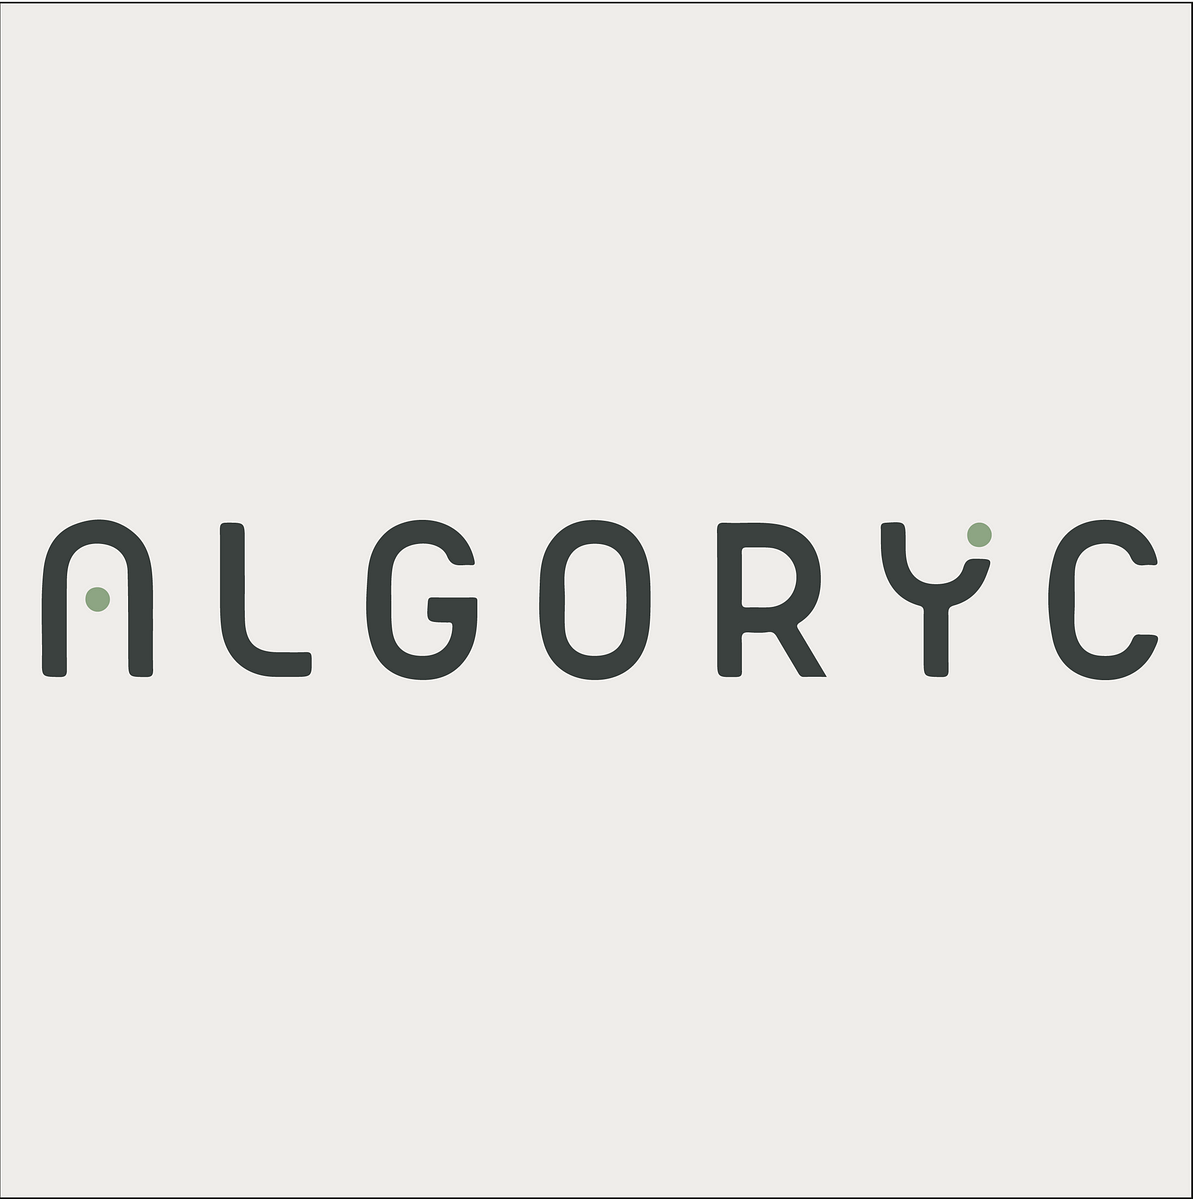 ALGORYC — An Introduction. Algoryc is an innovative young start-up…, by M.  Haseeb Hassan, ALGORYC